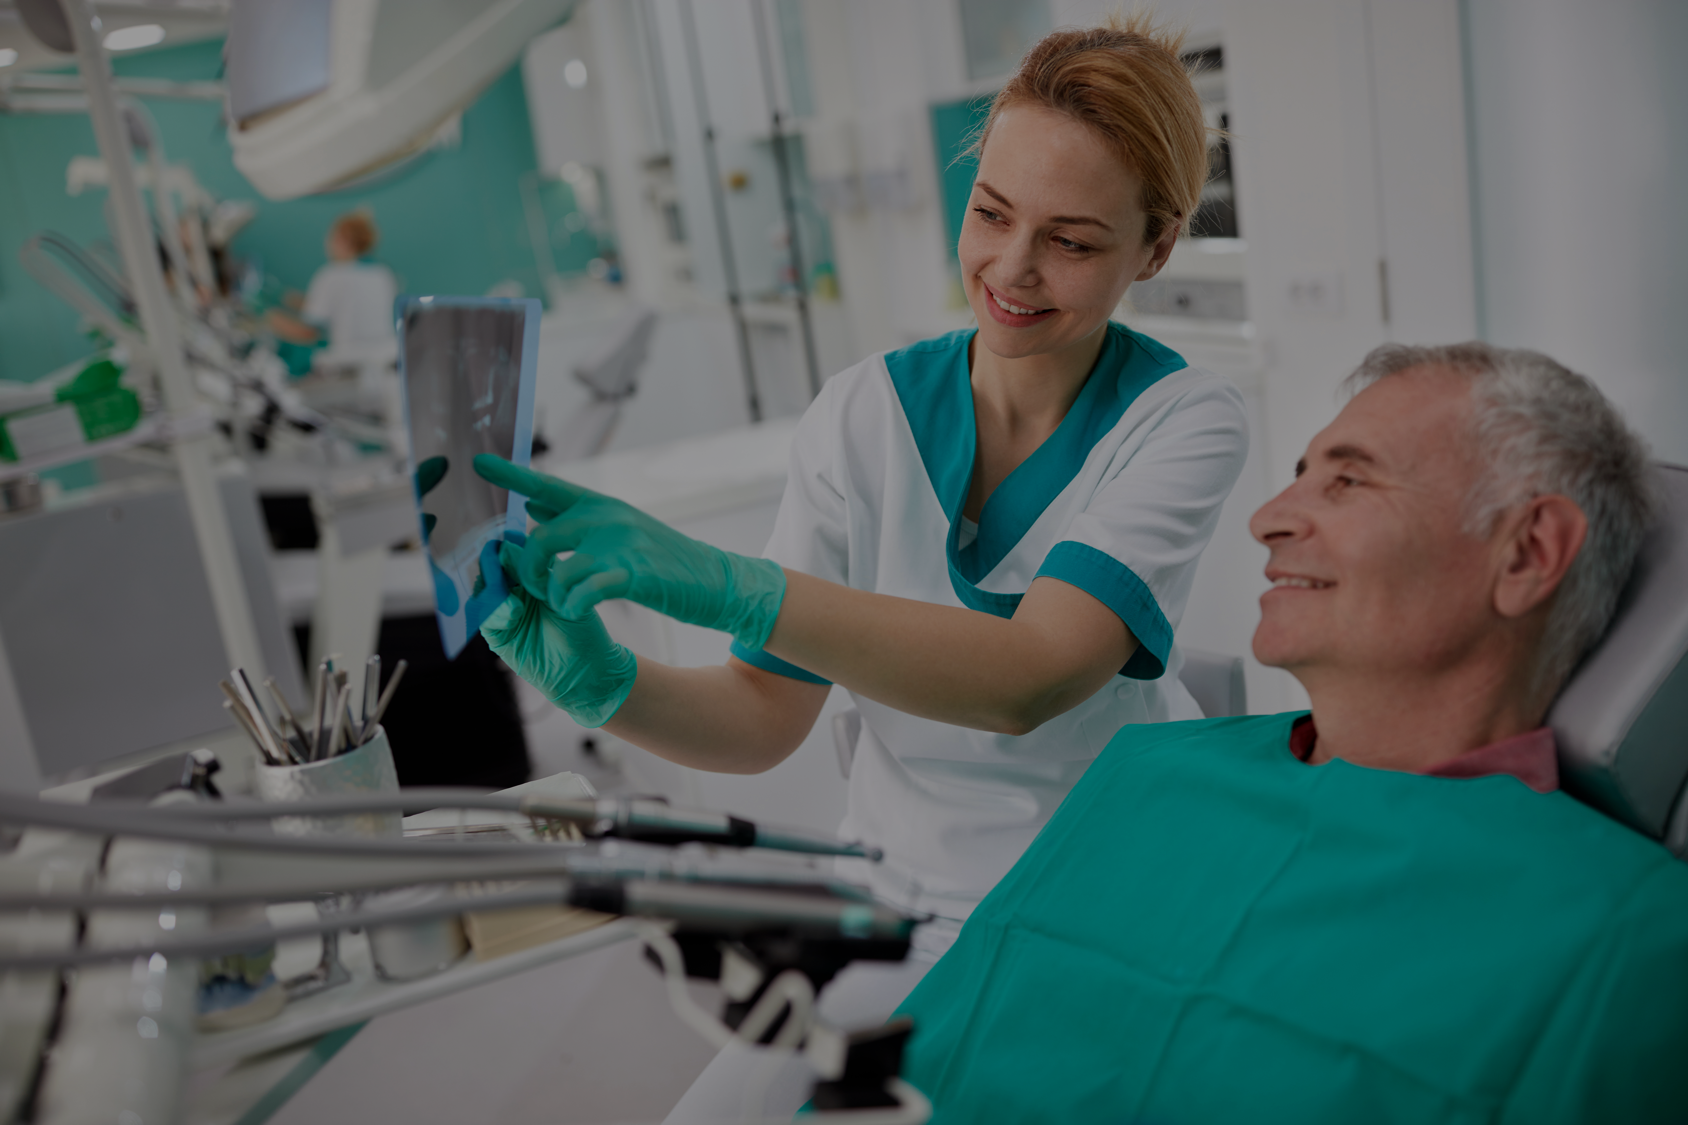   Dental Revenue Cycle Management   From CDT coding to effective design of UCR (Usual, Customary and Reasonable) fee schedule, we   optimize revenue and reduce denials for dental offices.    Contact us   